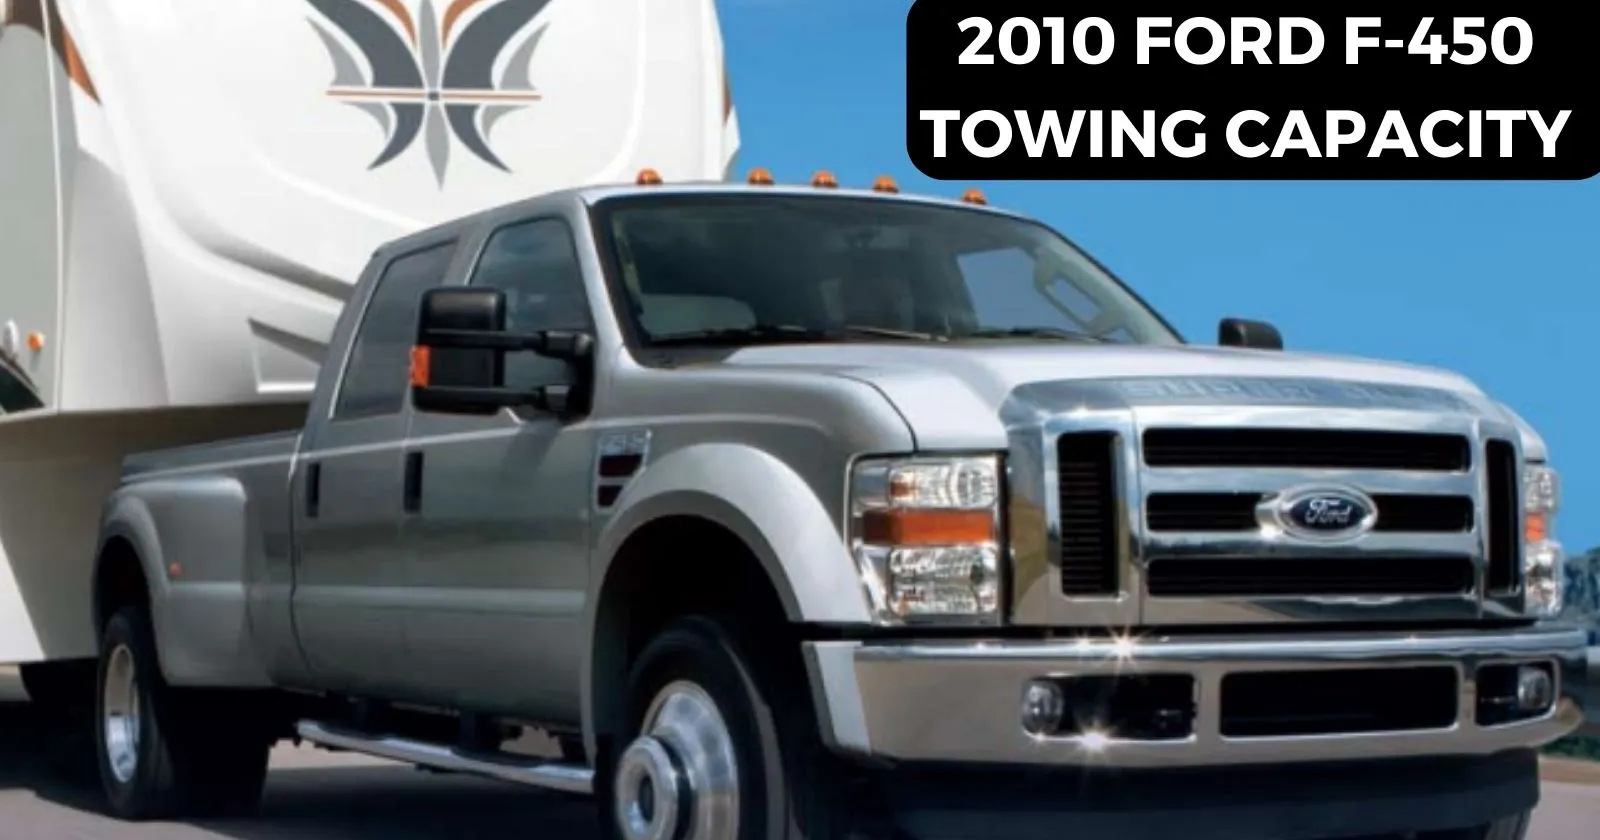 explore-2010-ford-f450-towing-capacity-with-chart-thecartowing